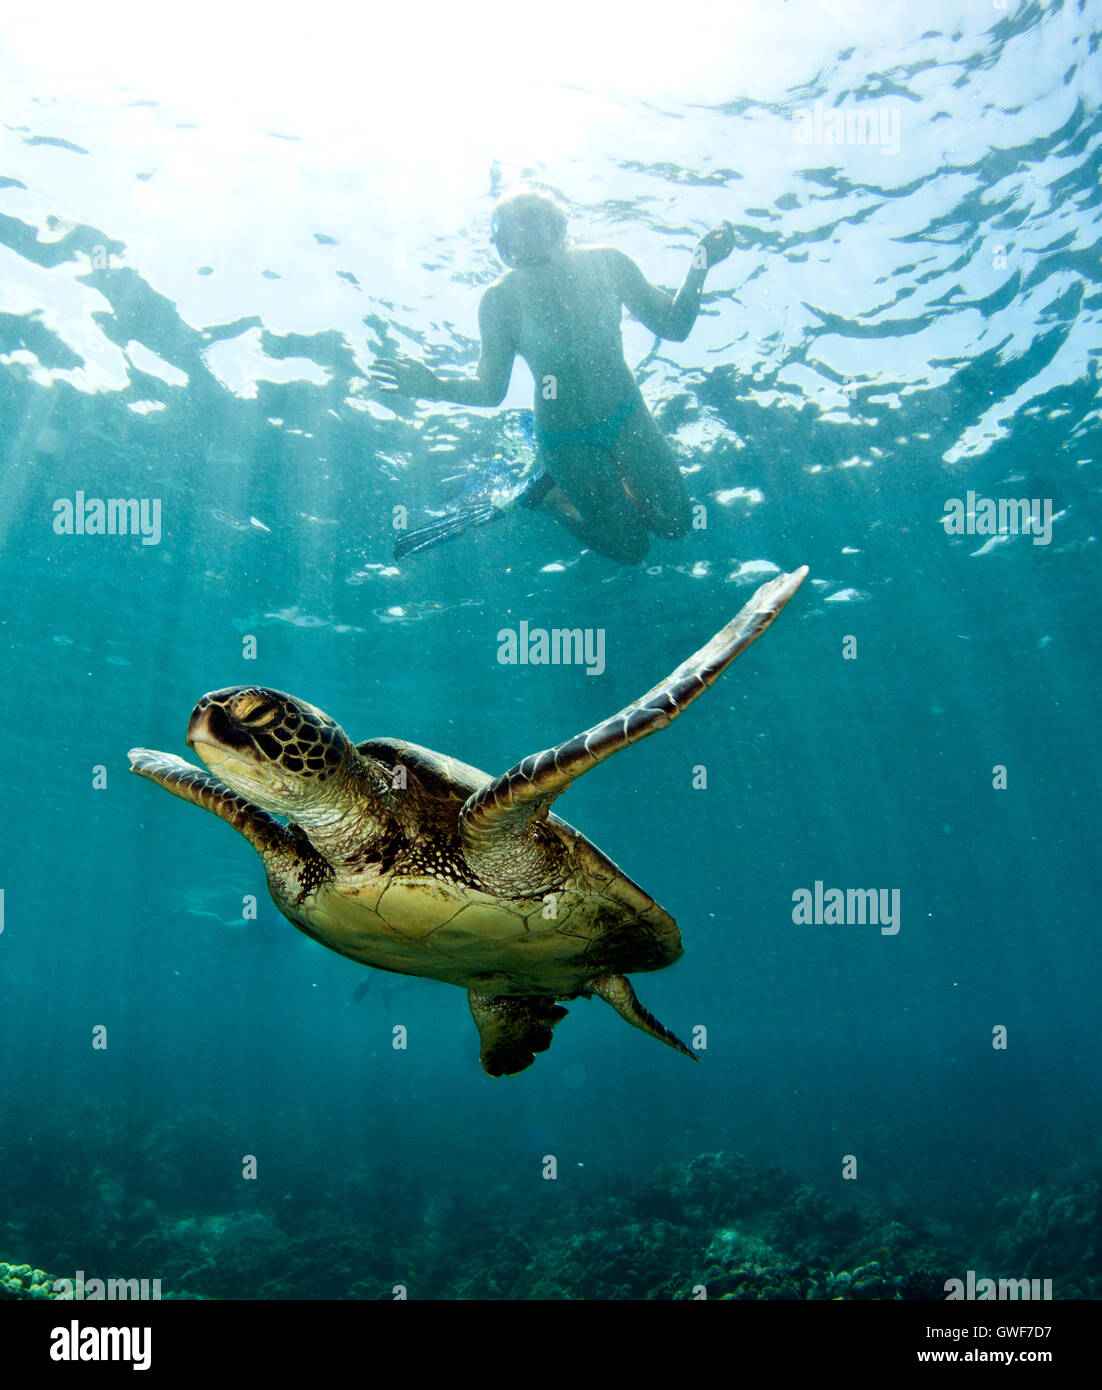 Green sea turtles are a staple of Hawaiian marine life.  They can be seen cruising over reefs, getting a spa at a local cleaning Stock Photo